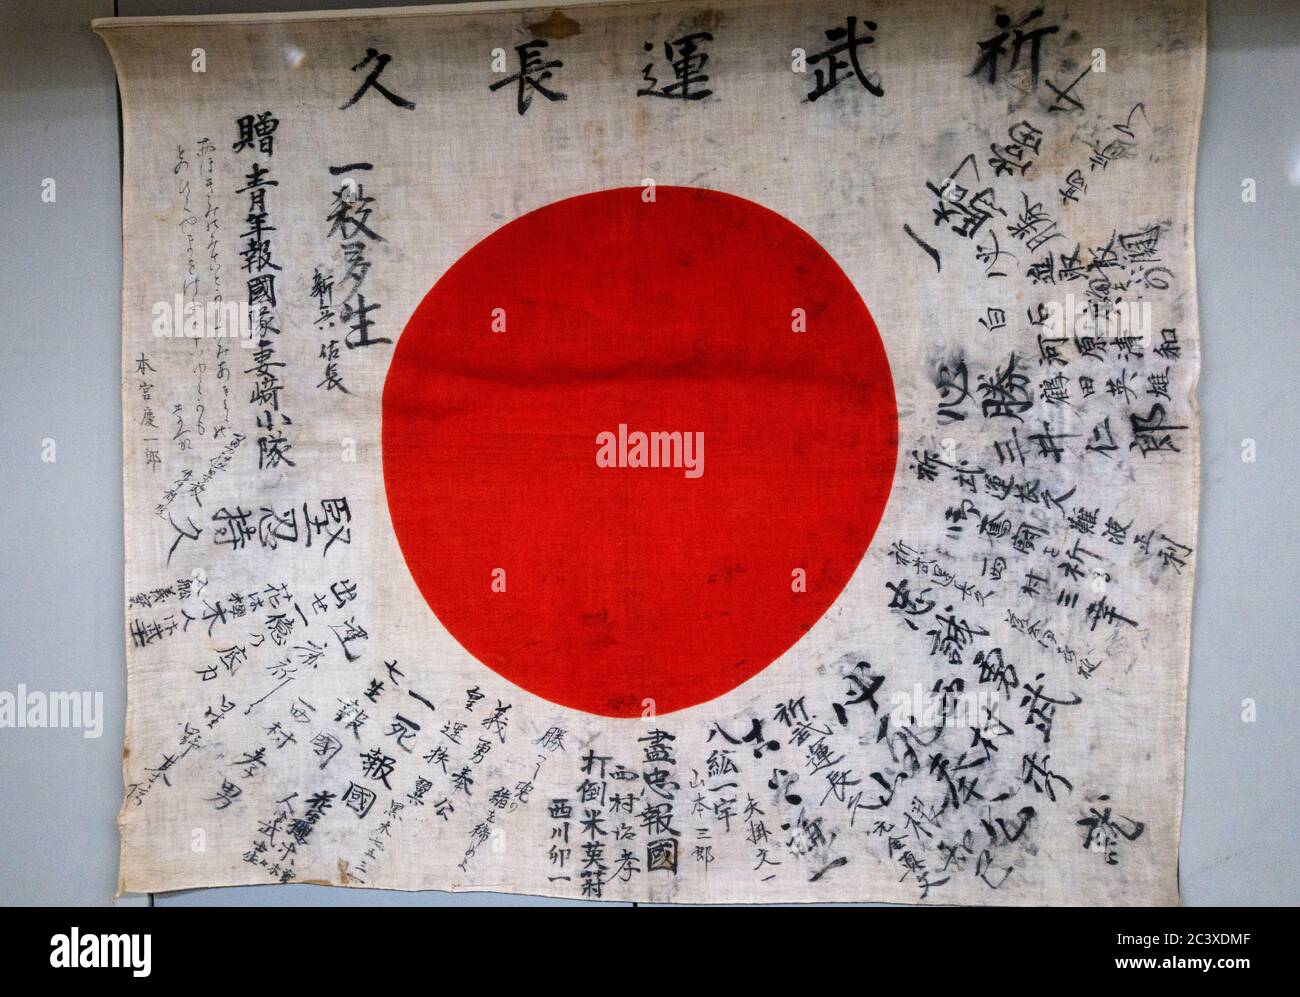 A Japanese flag which belonged to a Kamikaze soldier who would have worn it on his head on display in Bletchley Park, Bletchley, Buckinghamshire, UK. Stock Photo